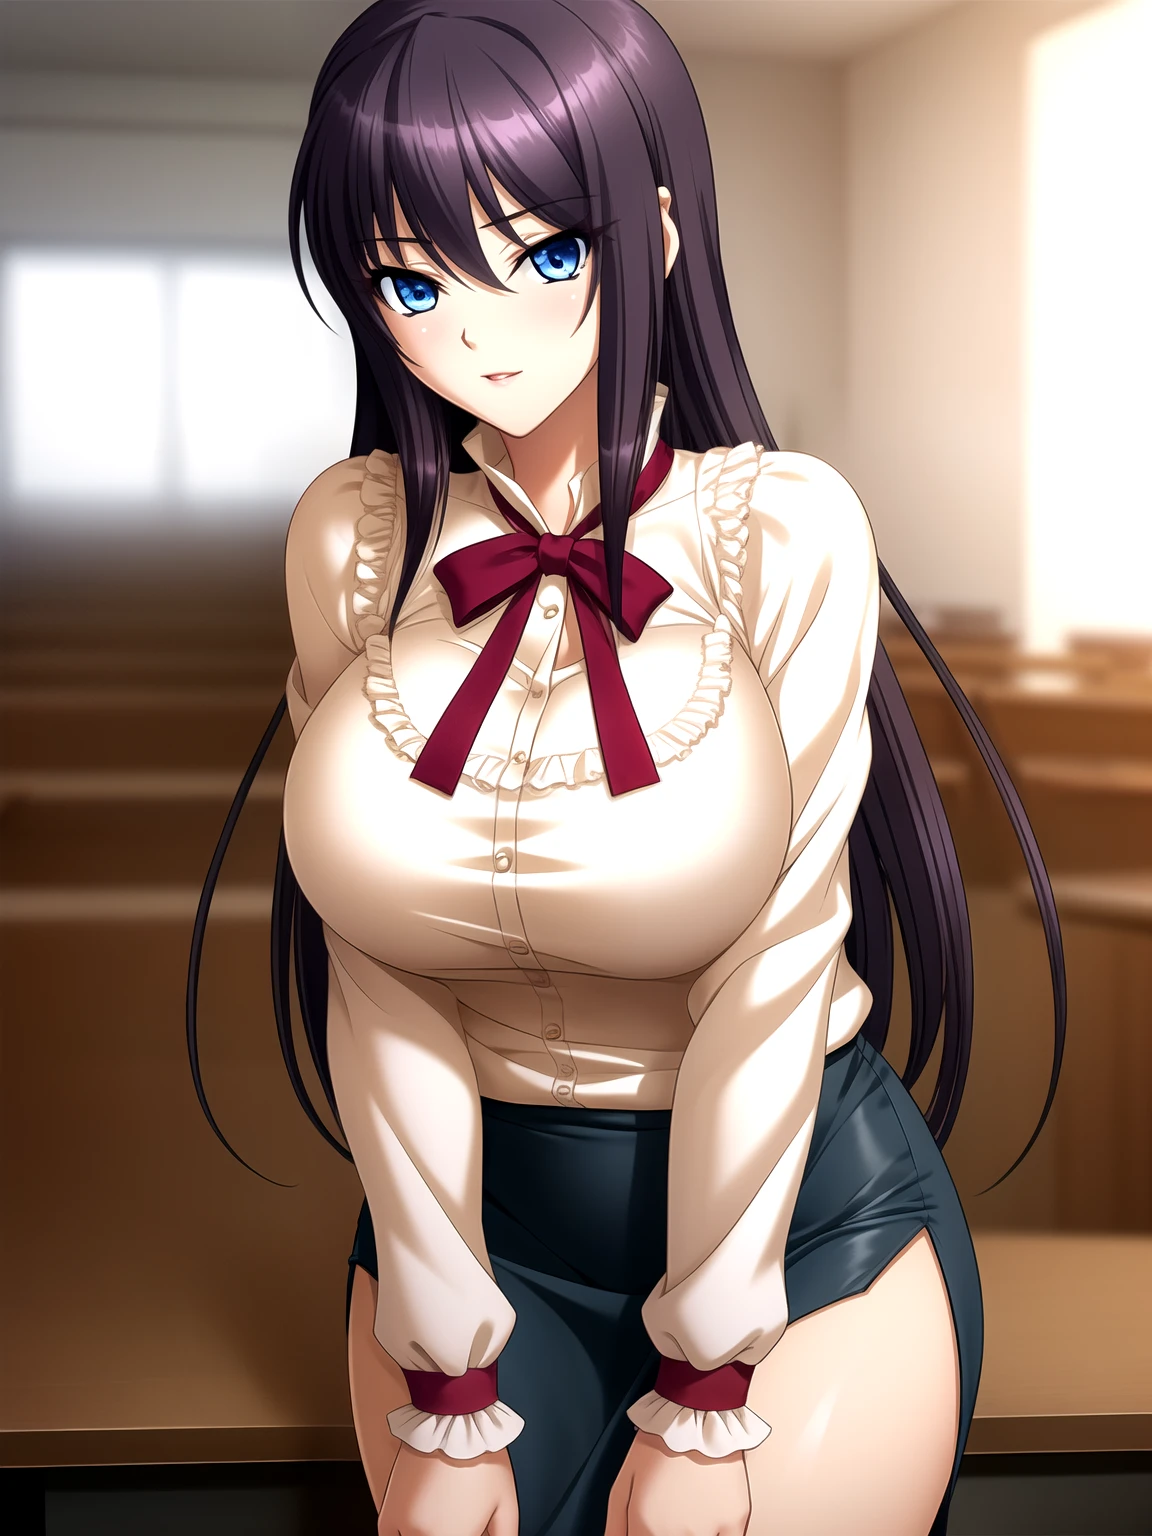 long_hair, breast, blue_Eye, purple_hair,
best quality, Ultra-high resolution, (masterpiece:1.2), best quality, Game CG, high_detailed,extremely_detailed_CG_Unite_8k_wallpaper,illustration,high resolution,absurd,
1 Girl, (portrait:1.4), (Mature female), (milf), classroom,
Beautiful long legs,Beautiful Body,beautiful nose,Beautiful character design, perfect Eye, Perfect face,
skirt, decorate, Large target_breast, pencil skirt,
Looking at the audience, permanent,